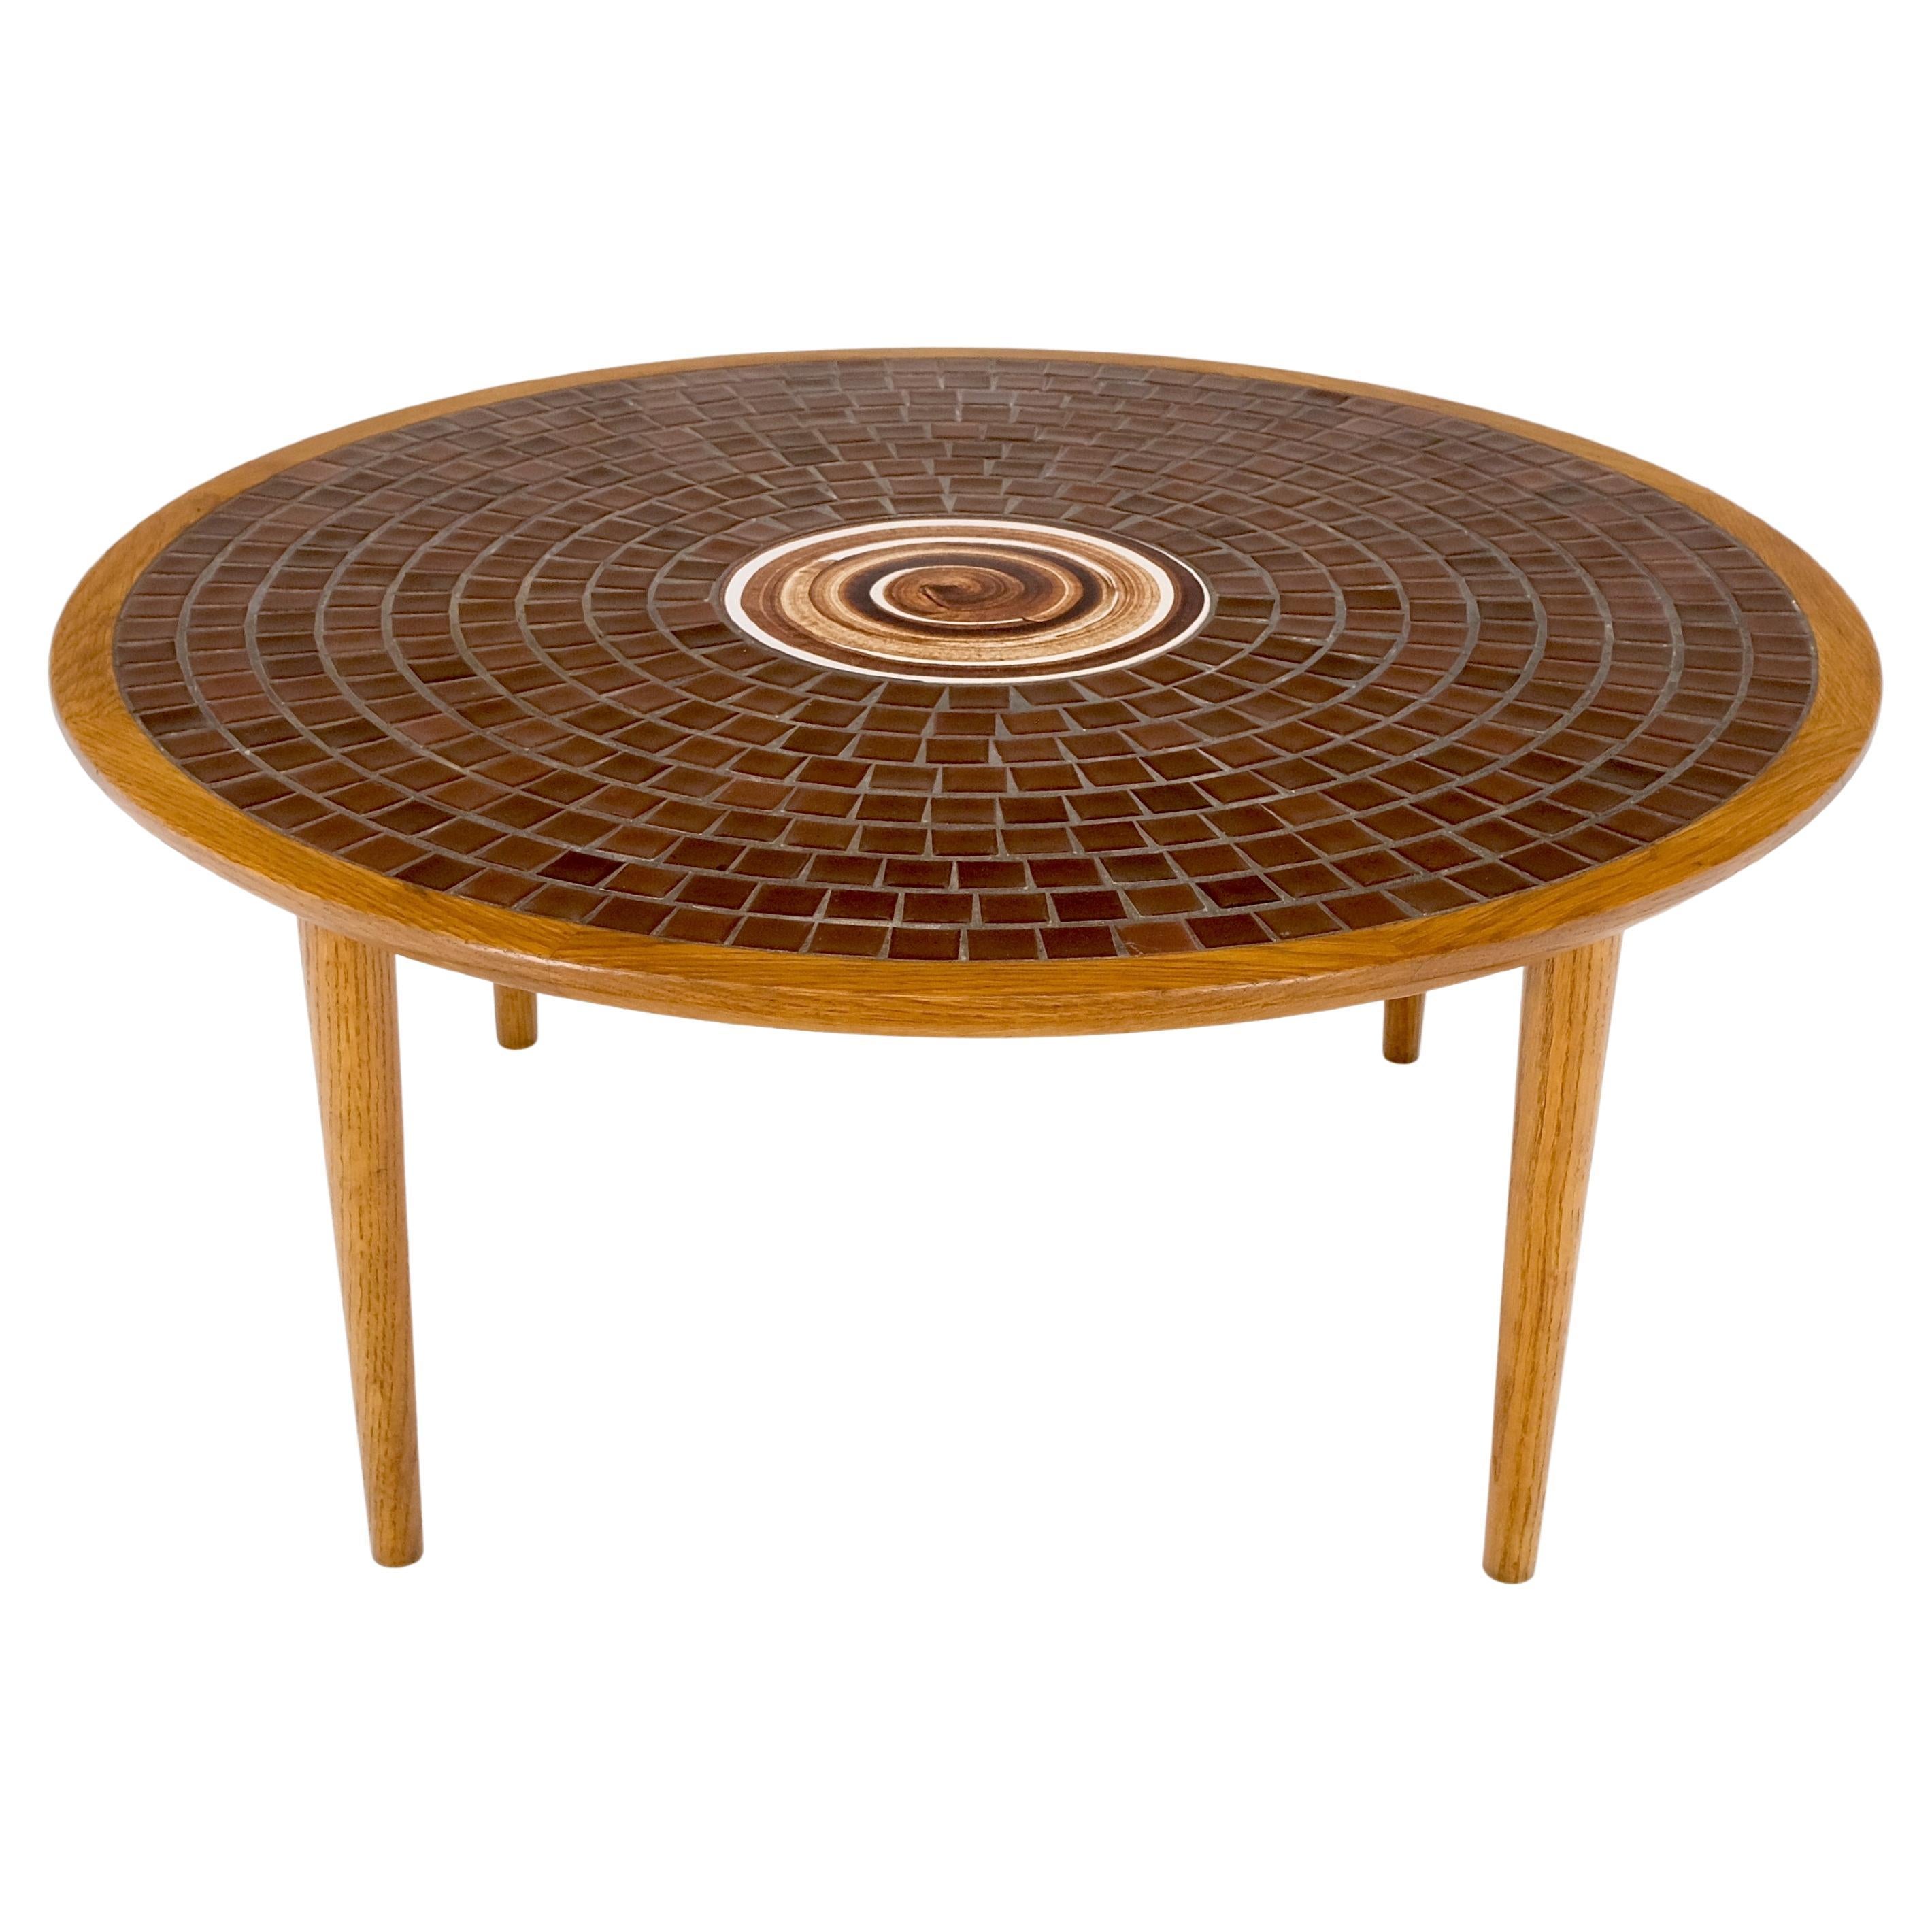 Gordon Martz Tile Mosaic Round Top Coffee Table on Tapered Dowel Legs MINT! For Sale